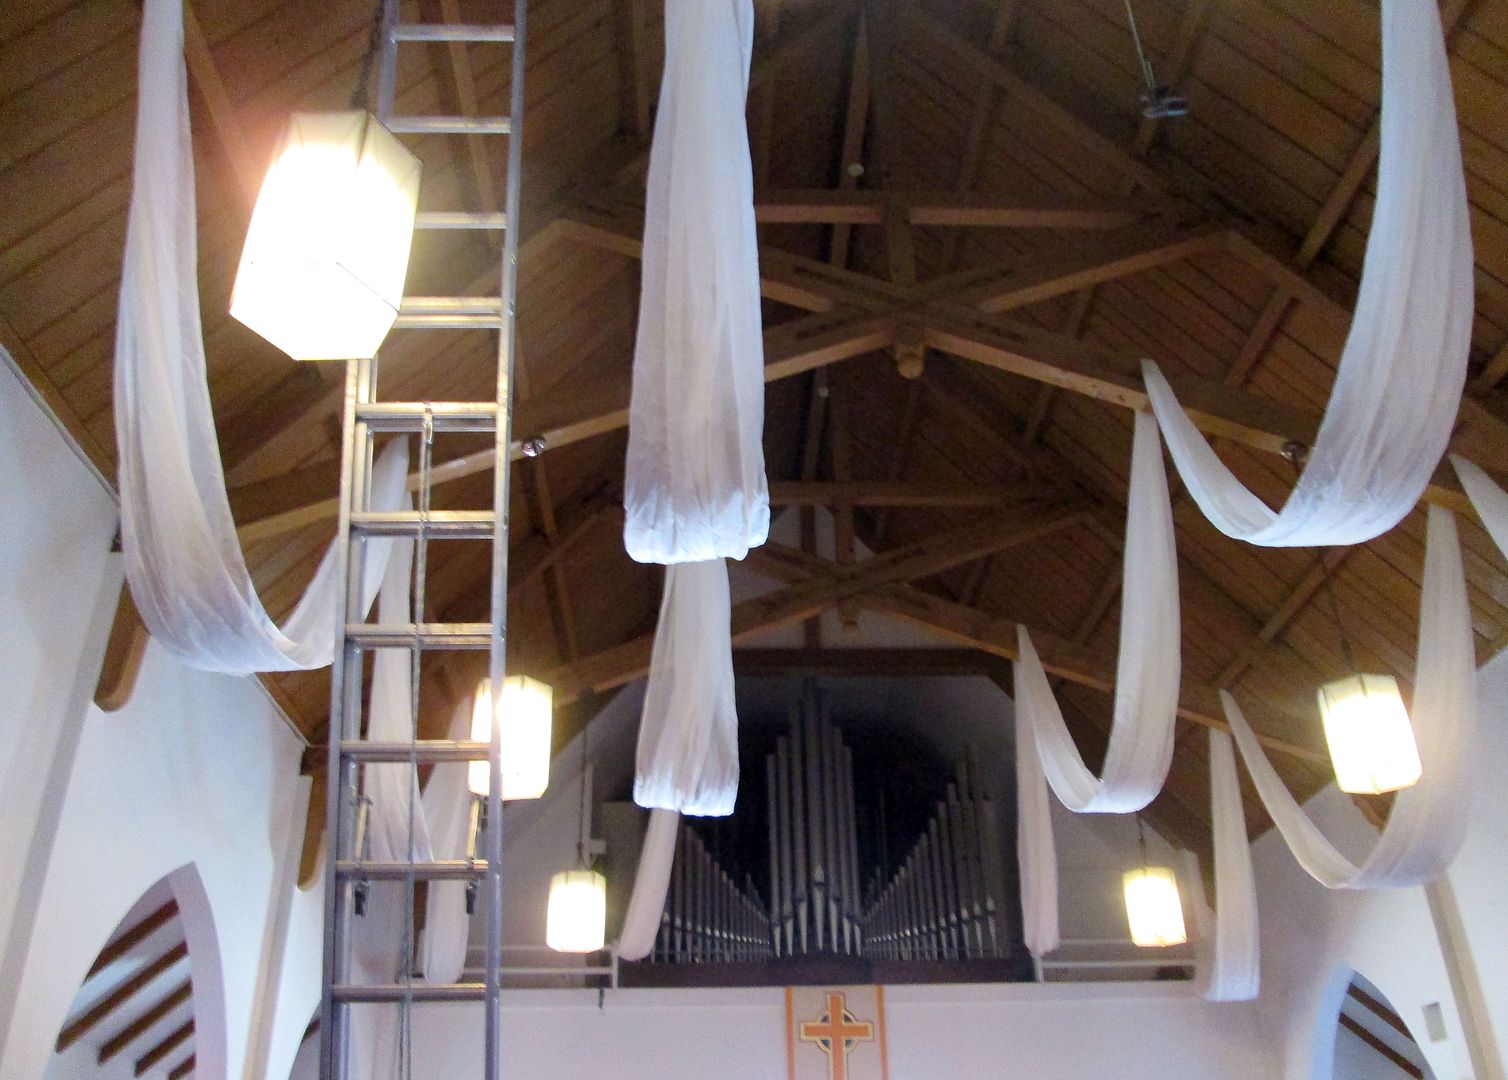 LCM sanctuary easter ceiling banners